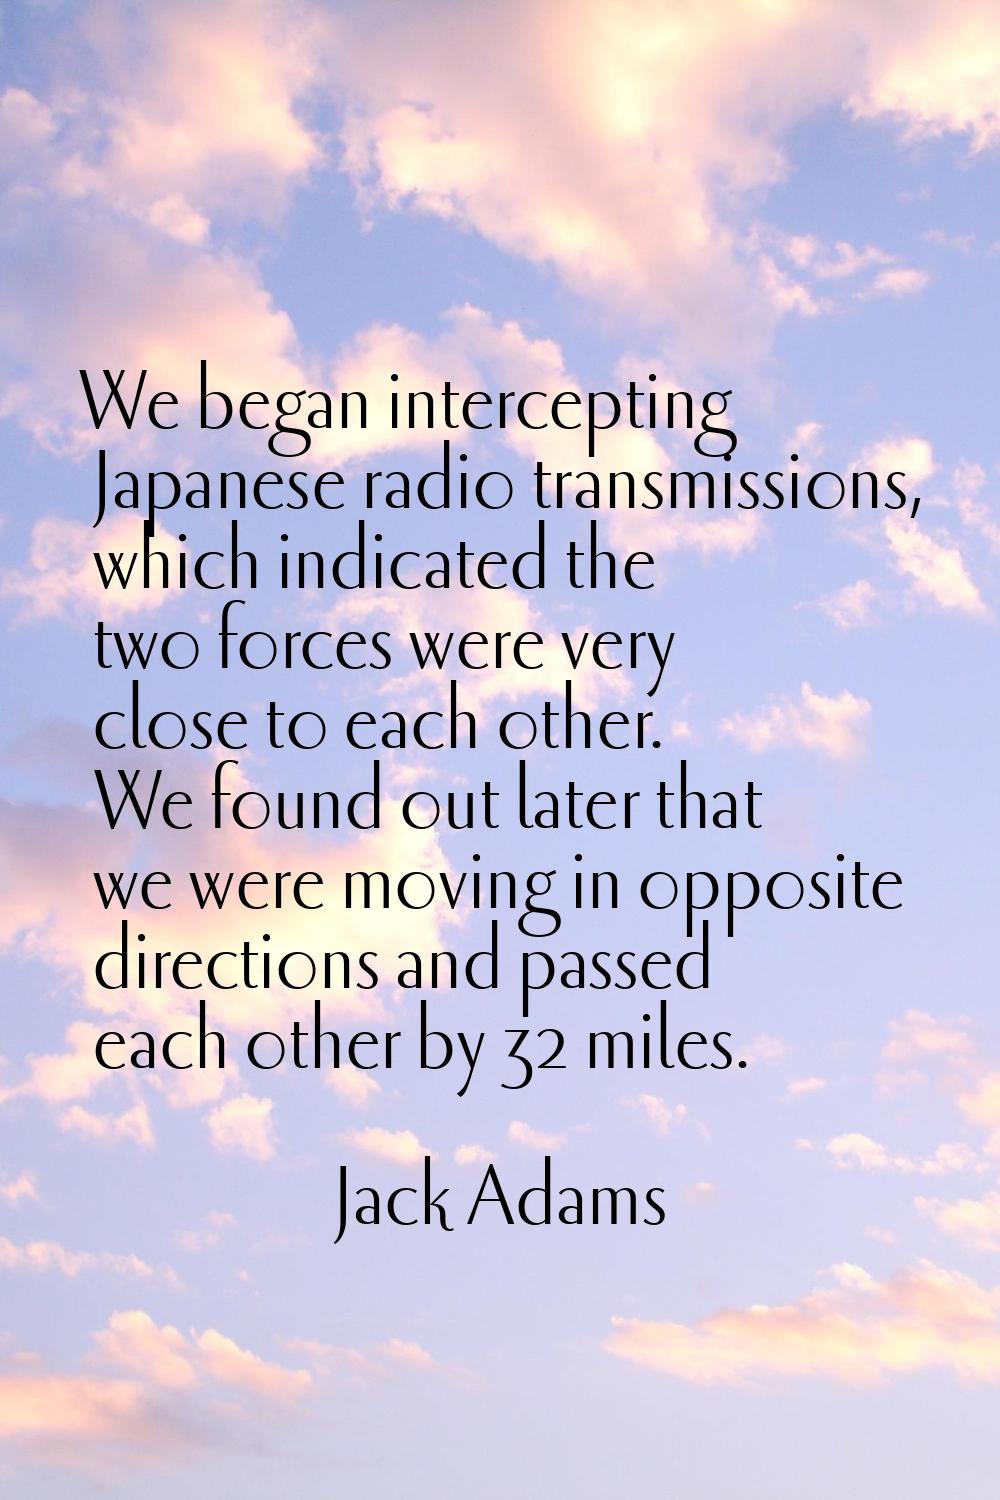 We began intercepting Japanese radio transmissions, which indicated the two forces were very close 